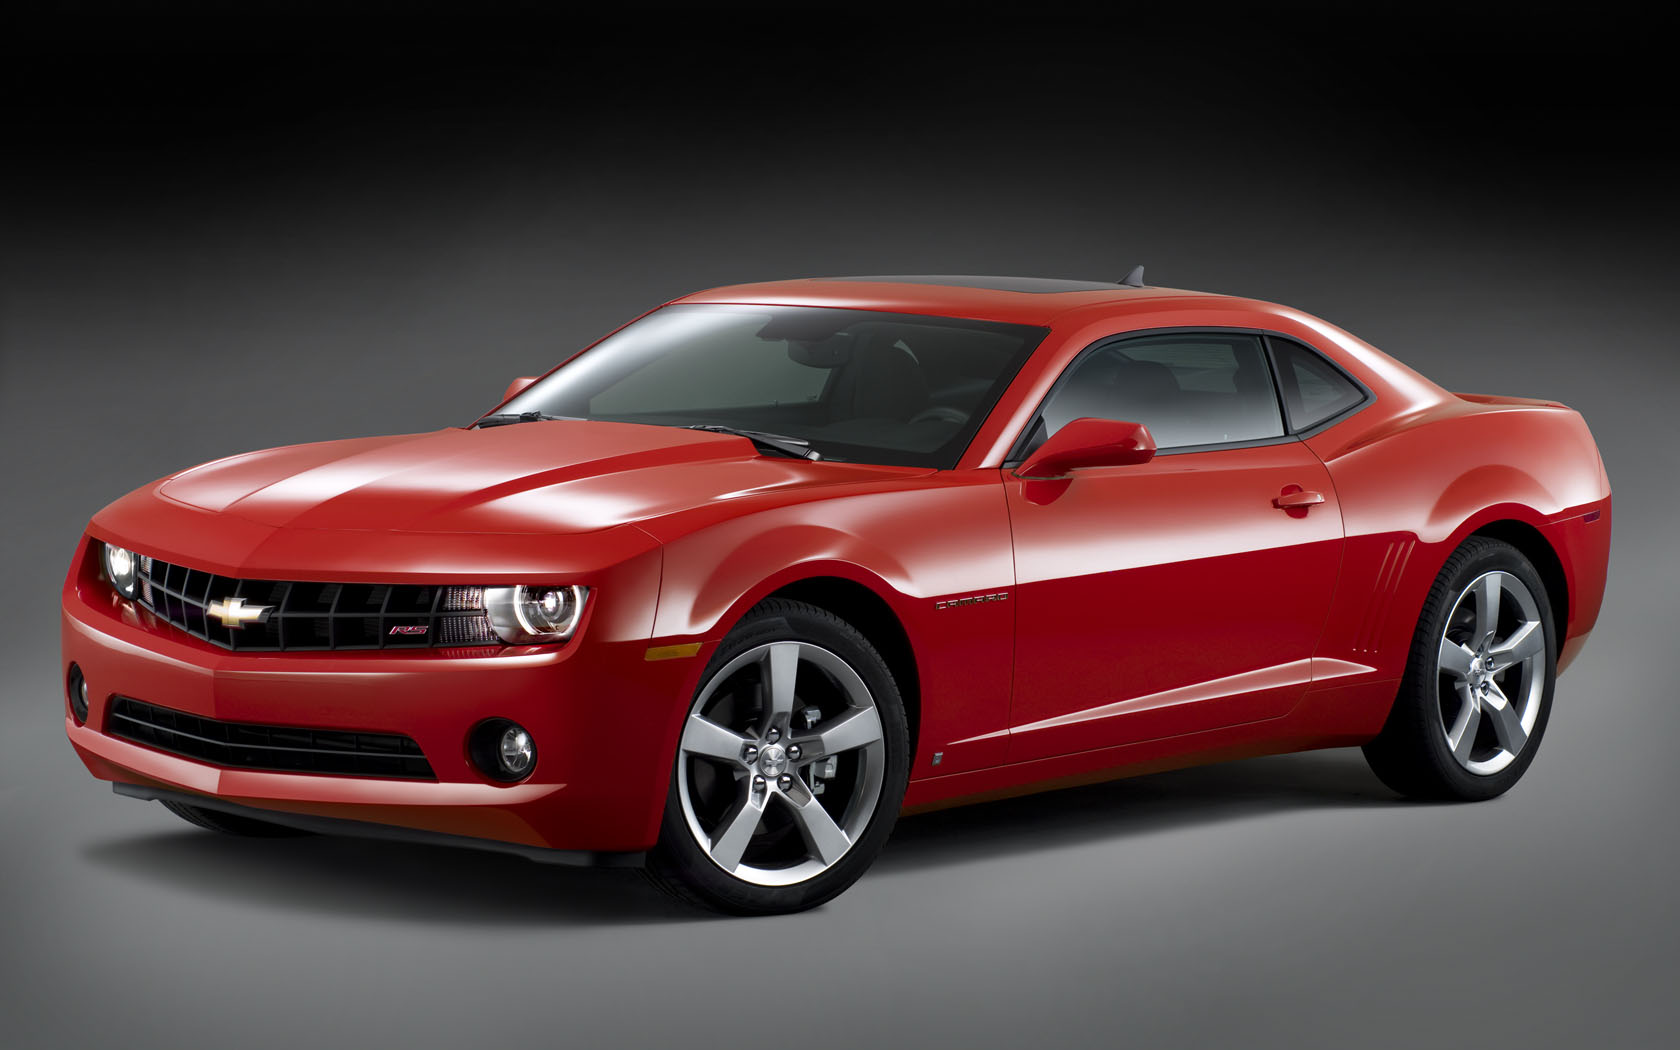 Red Chevy Camaro Wallpaper HD In Cars Imageci